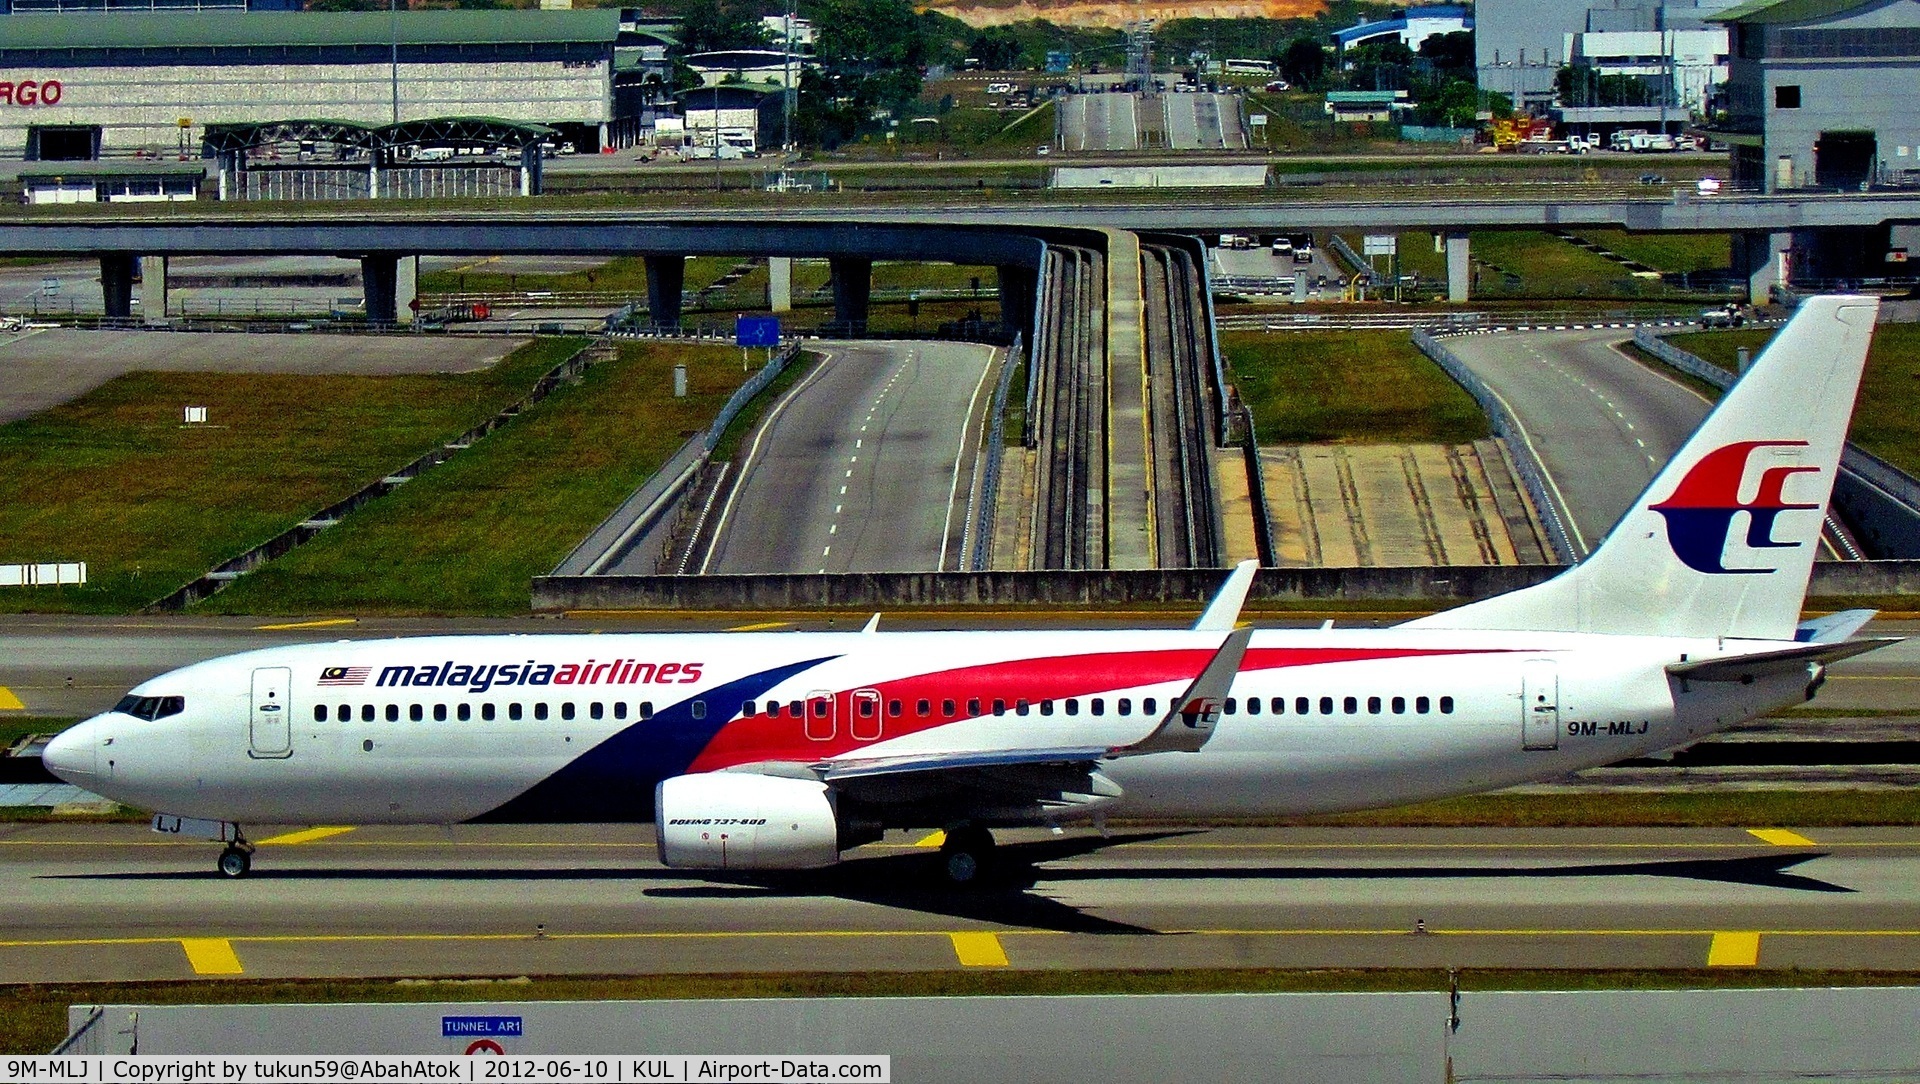 9M-MLJ, 1992 Boeing 737-4S3 C/N 25594, Malaysia Airlines